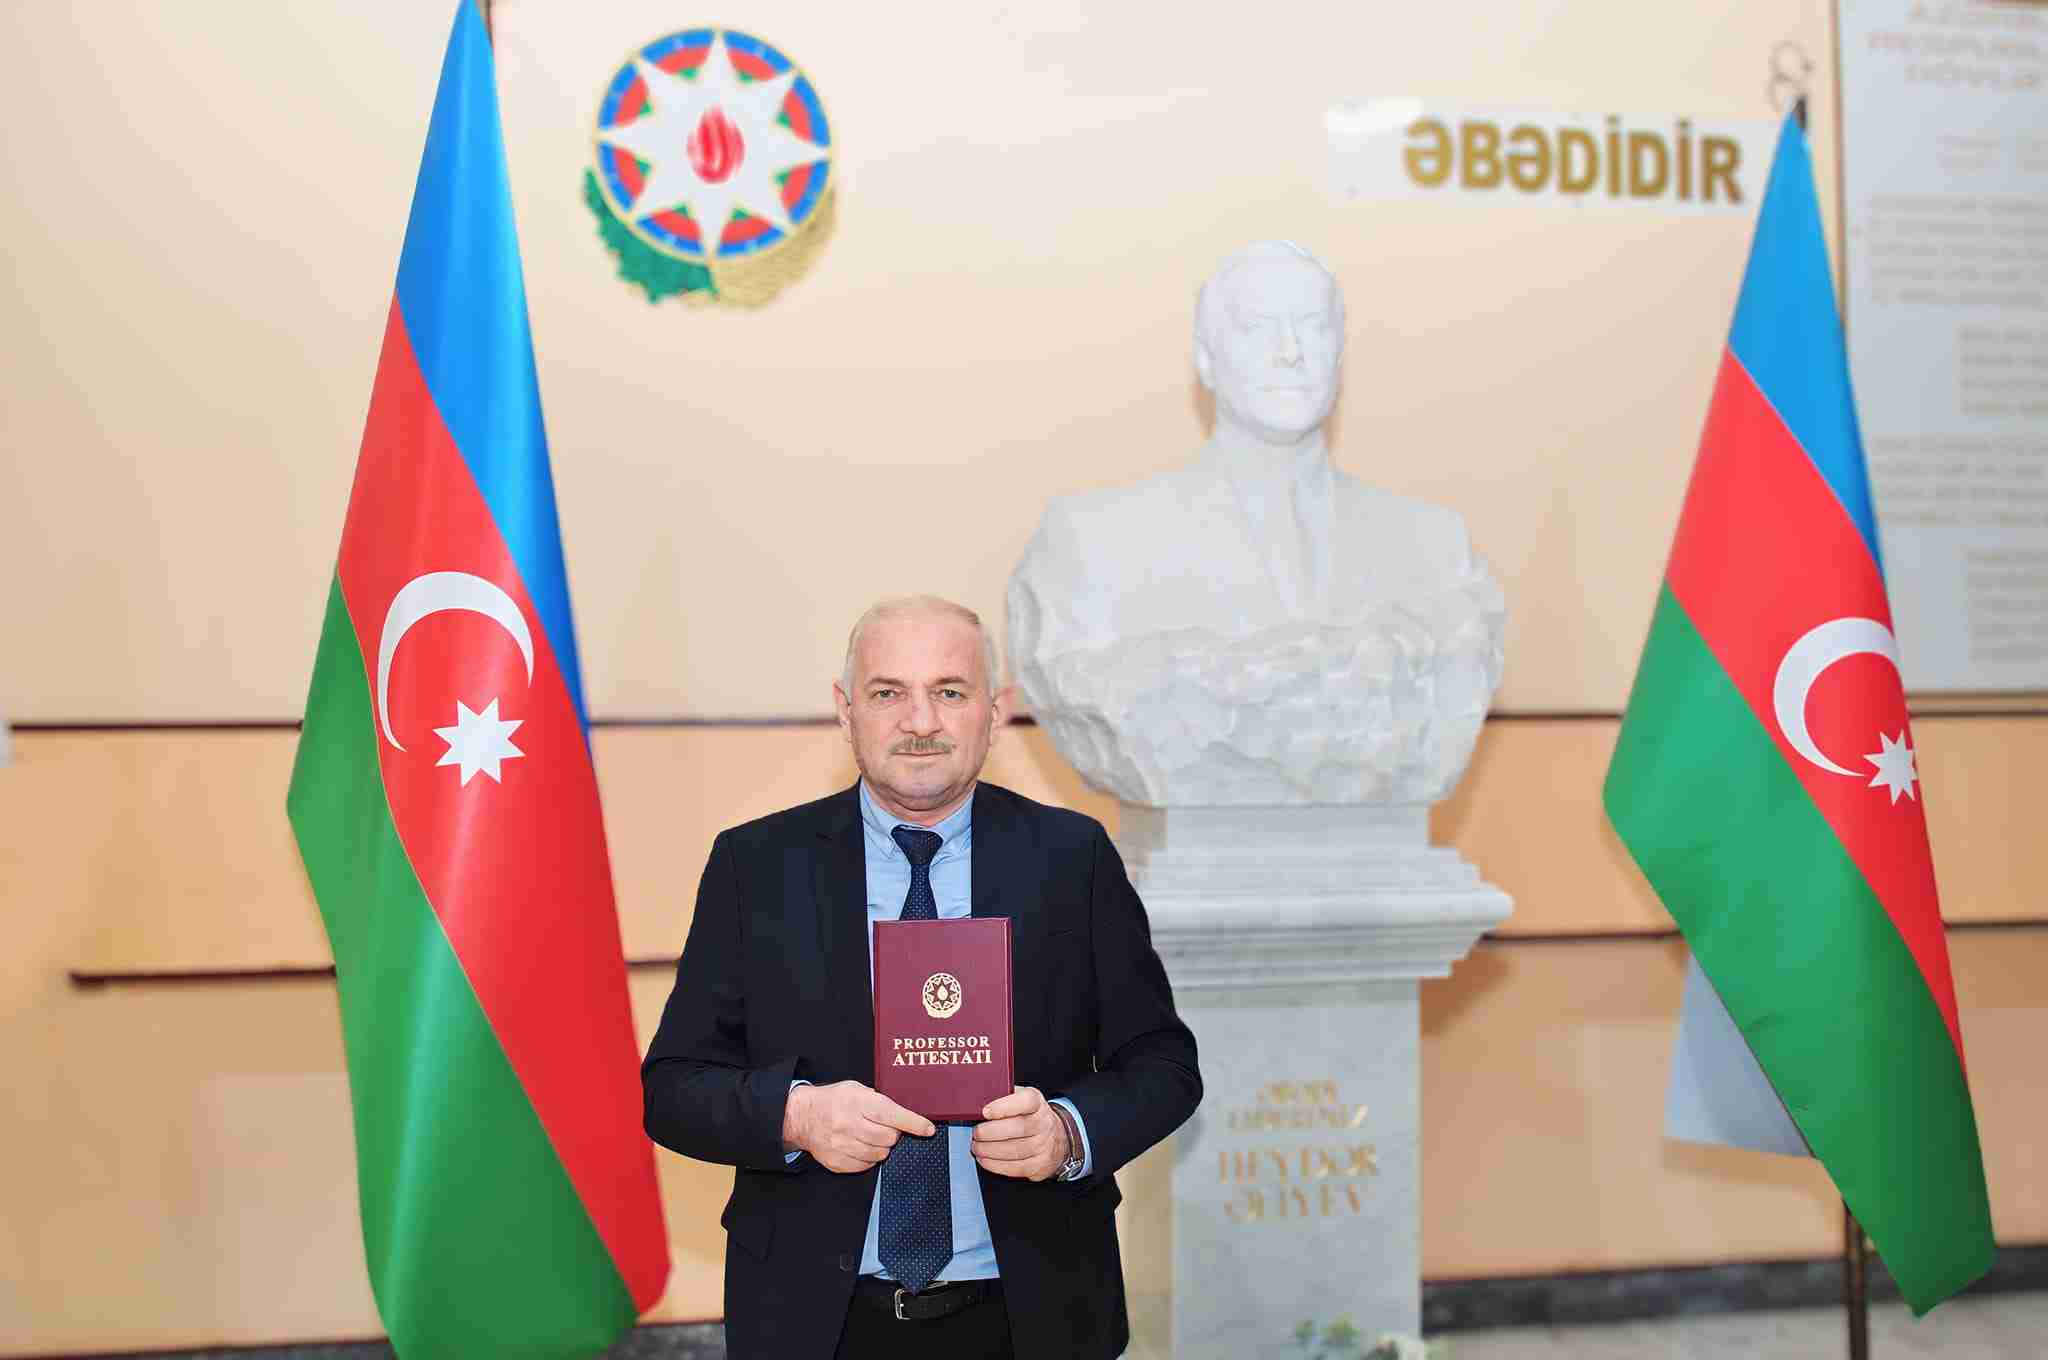 The head of the Department of Psychology, Pedagogy and Social Sciences of OYU was given the scientific title of Professor